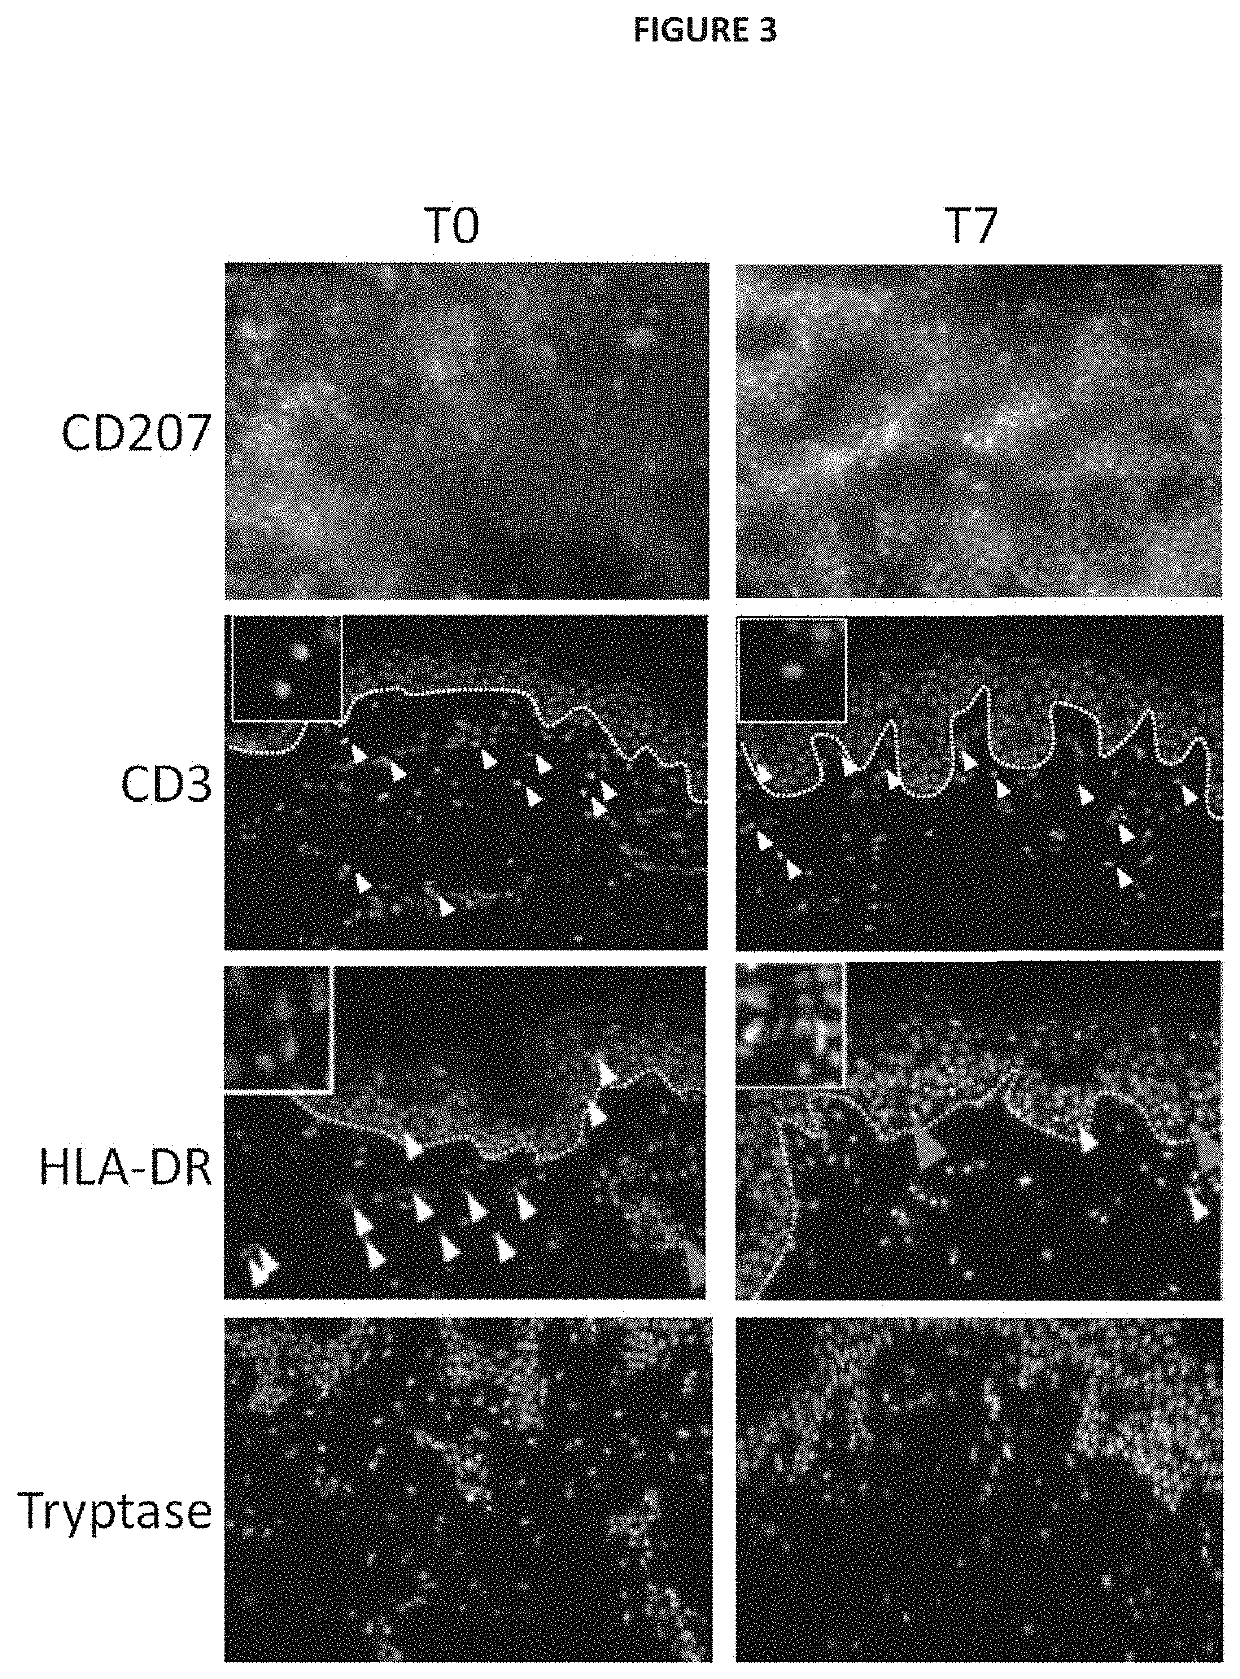 Ex vivo model of inflamed human skin and uses thereof for screening Anti-inflammatory compounds